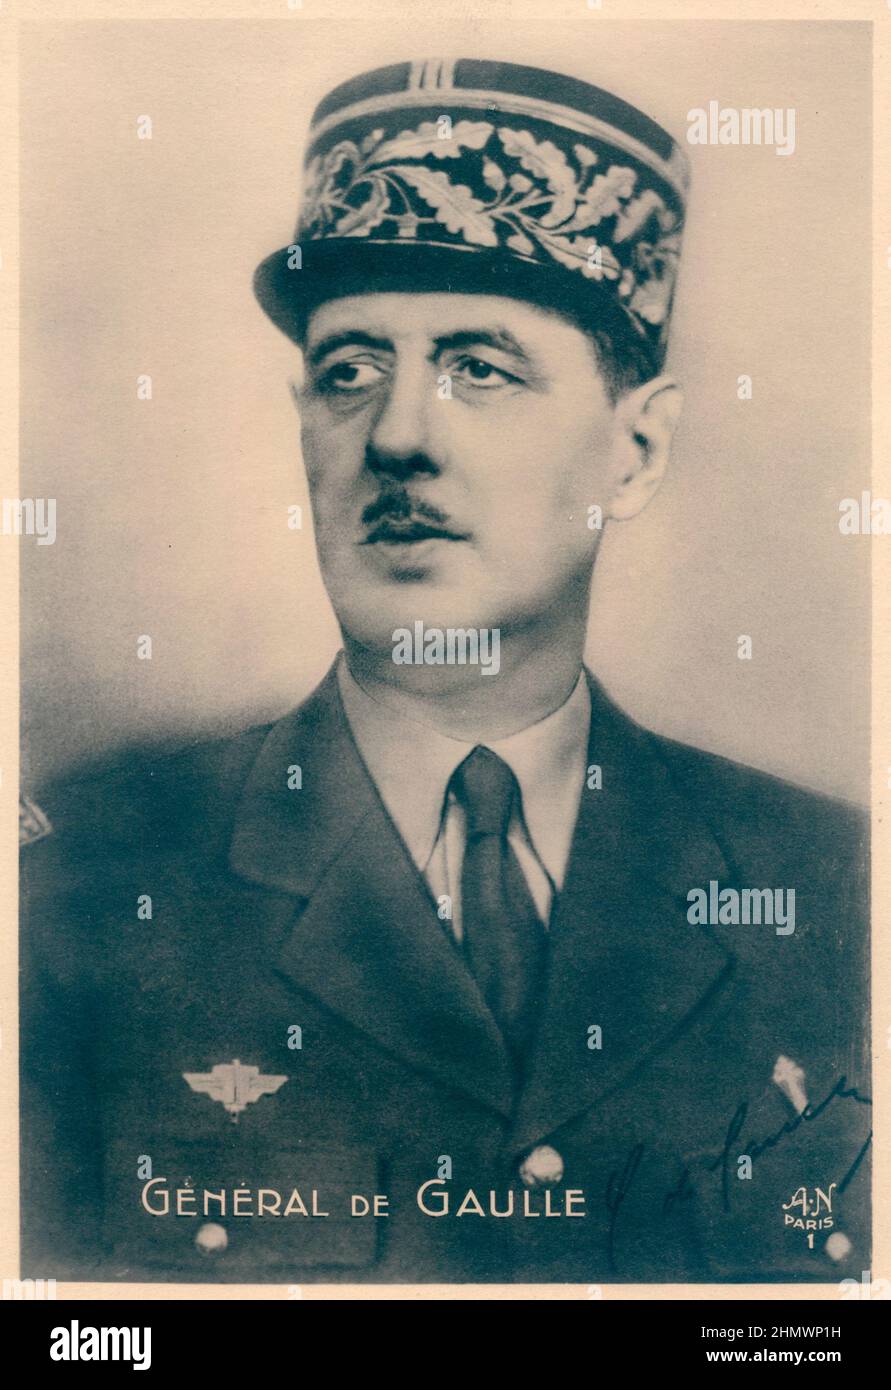 GENERAL DE GAULLE Charles André Joseph Marie de Gaulle was a French army officer and statesman who led Free France against Nazi Germany in World War II and chaired the Provisional Government of the French Republic from 1944 to 1946 in order to restore democracy in France. Stock Photo